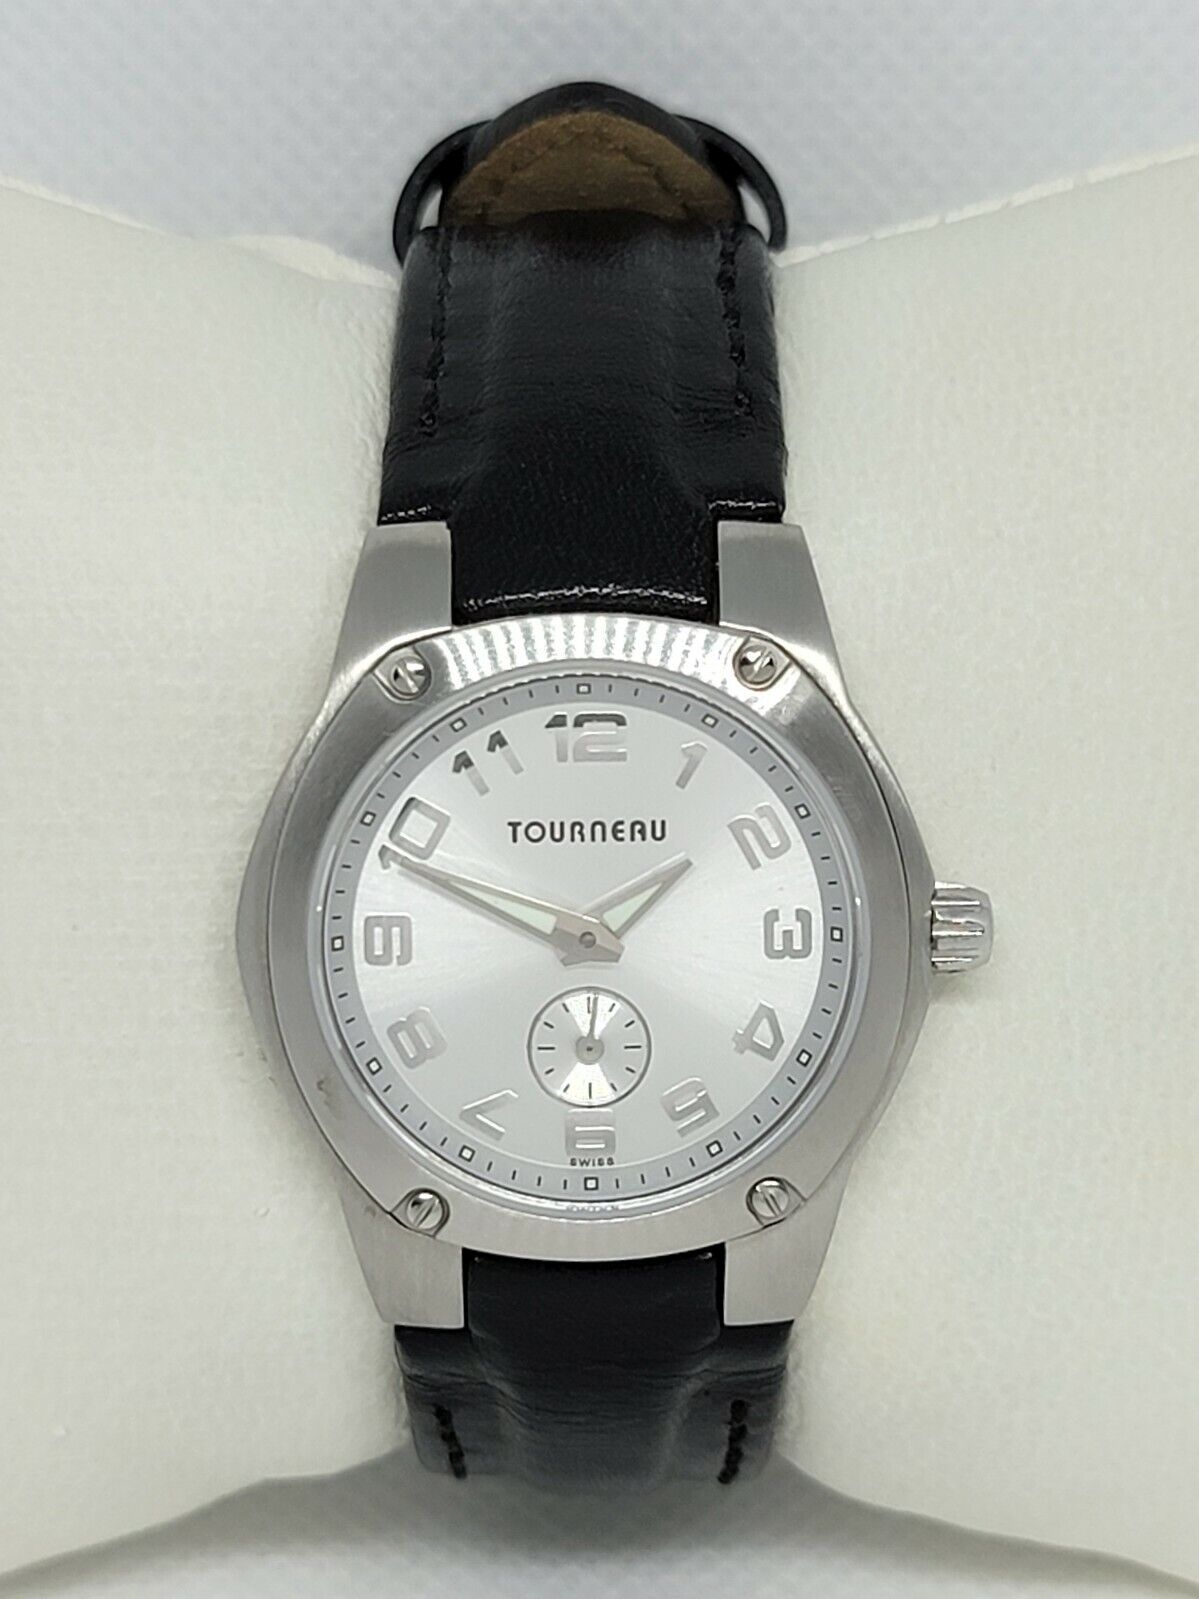 Ladies Tourneau Designed Exclusively for GAP INC Round Analog Watch E9